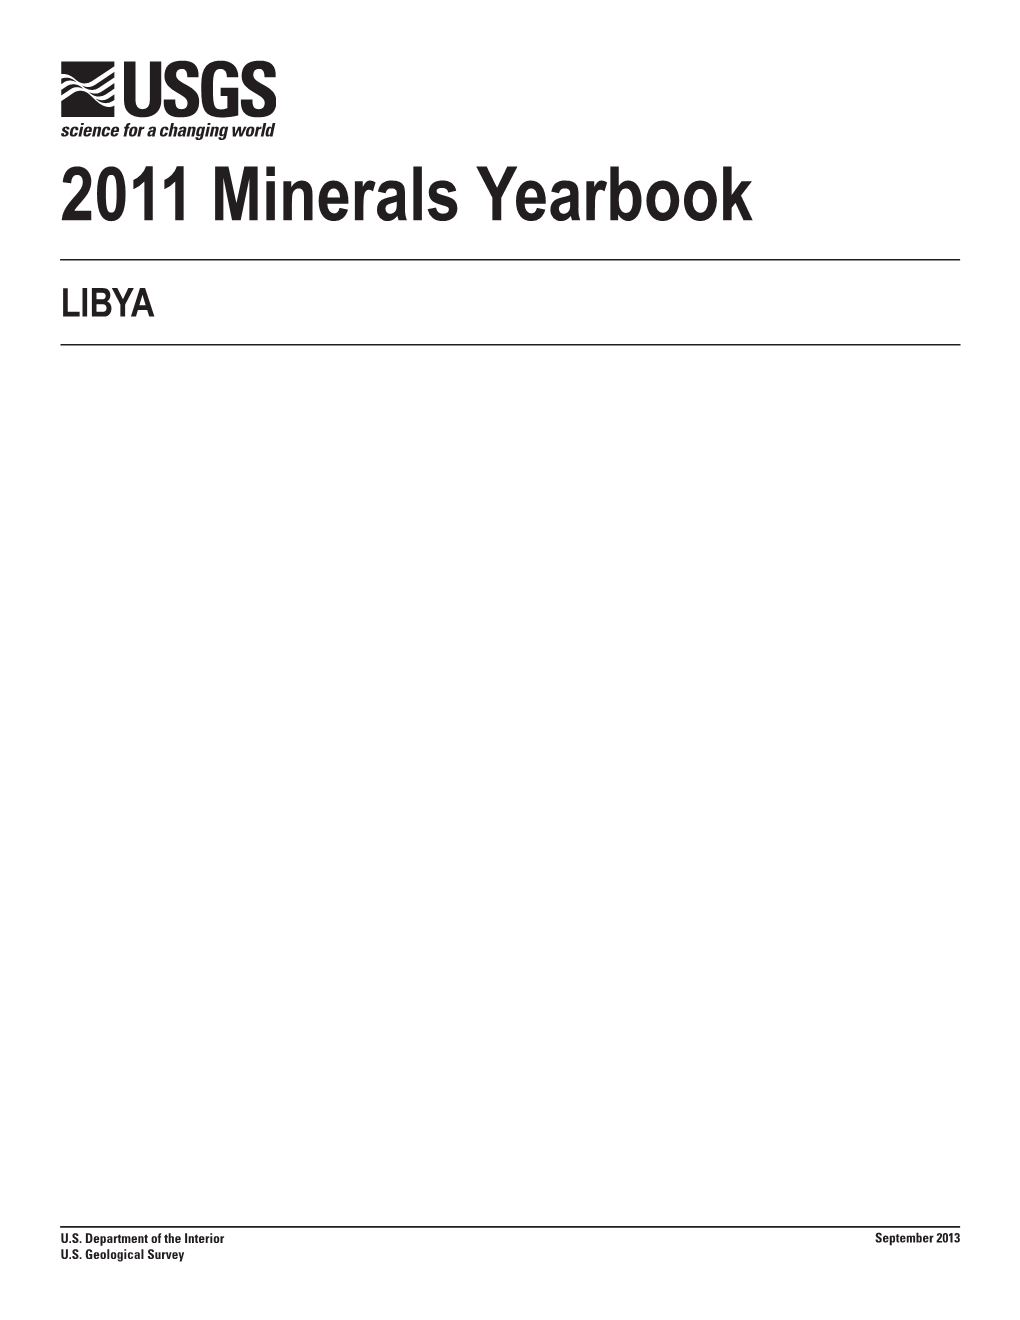 The Mineral Industry of Libya in 2011